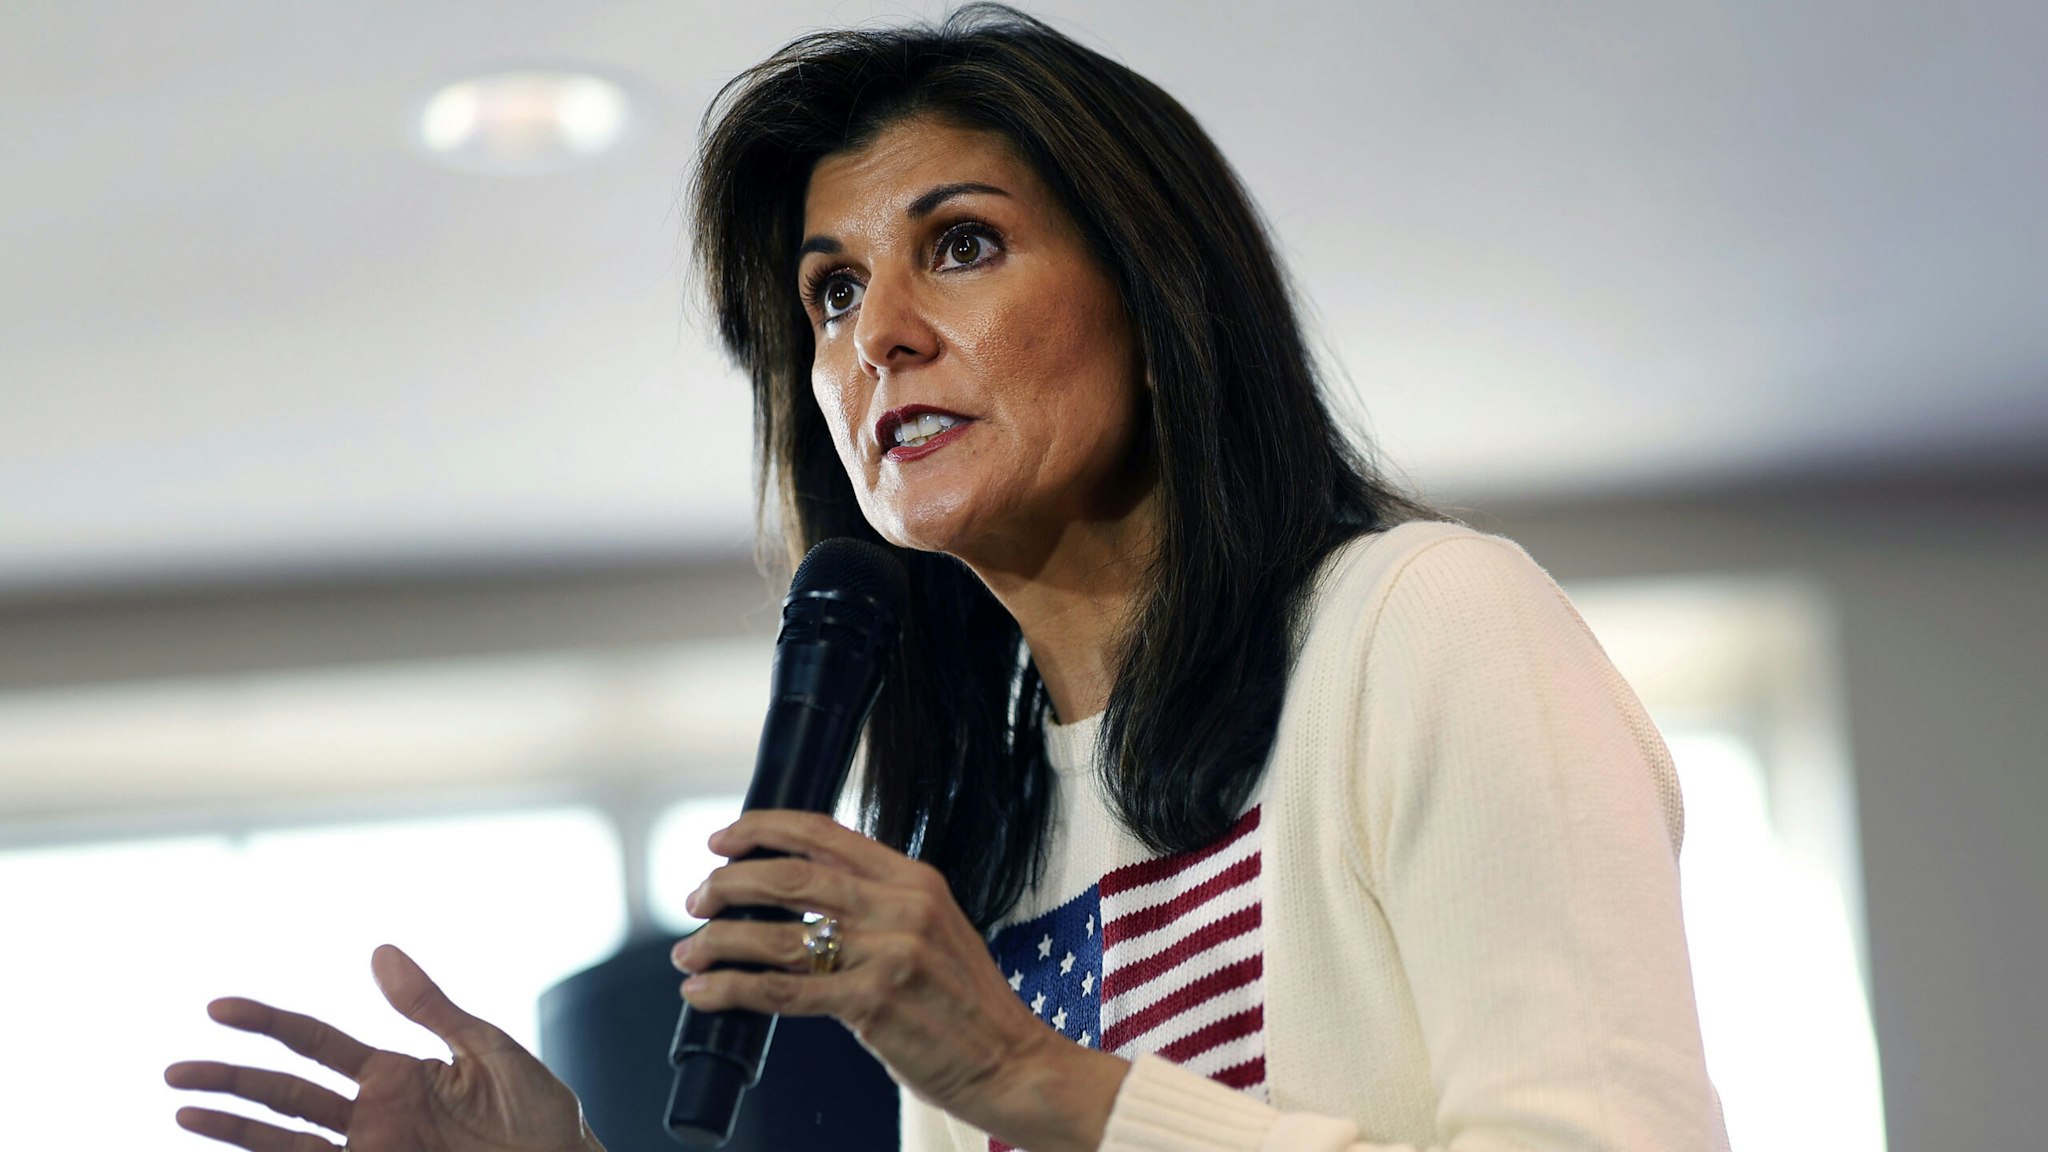 NEVADA, IOWA - DECEMBER 18: Republican presidential candidate former U.N. Ambassador Nikki Haley addresses the crowd during a campaign stop at the Nevada Fairgrounds community building on December 18, 2023 in Nevada, Iowa. Iowa Republicans will be the first to select their party's nominee for the 2024 presidential race when they go to caucus on January 15, 2024.